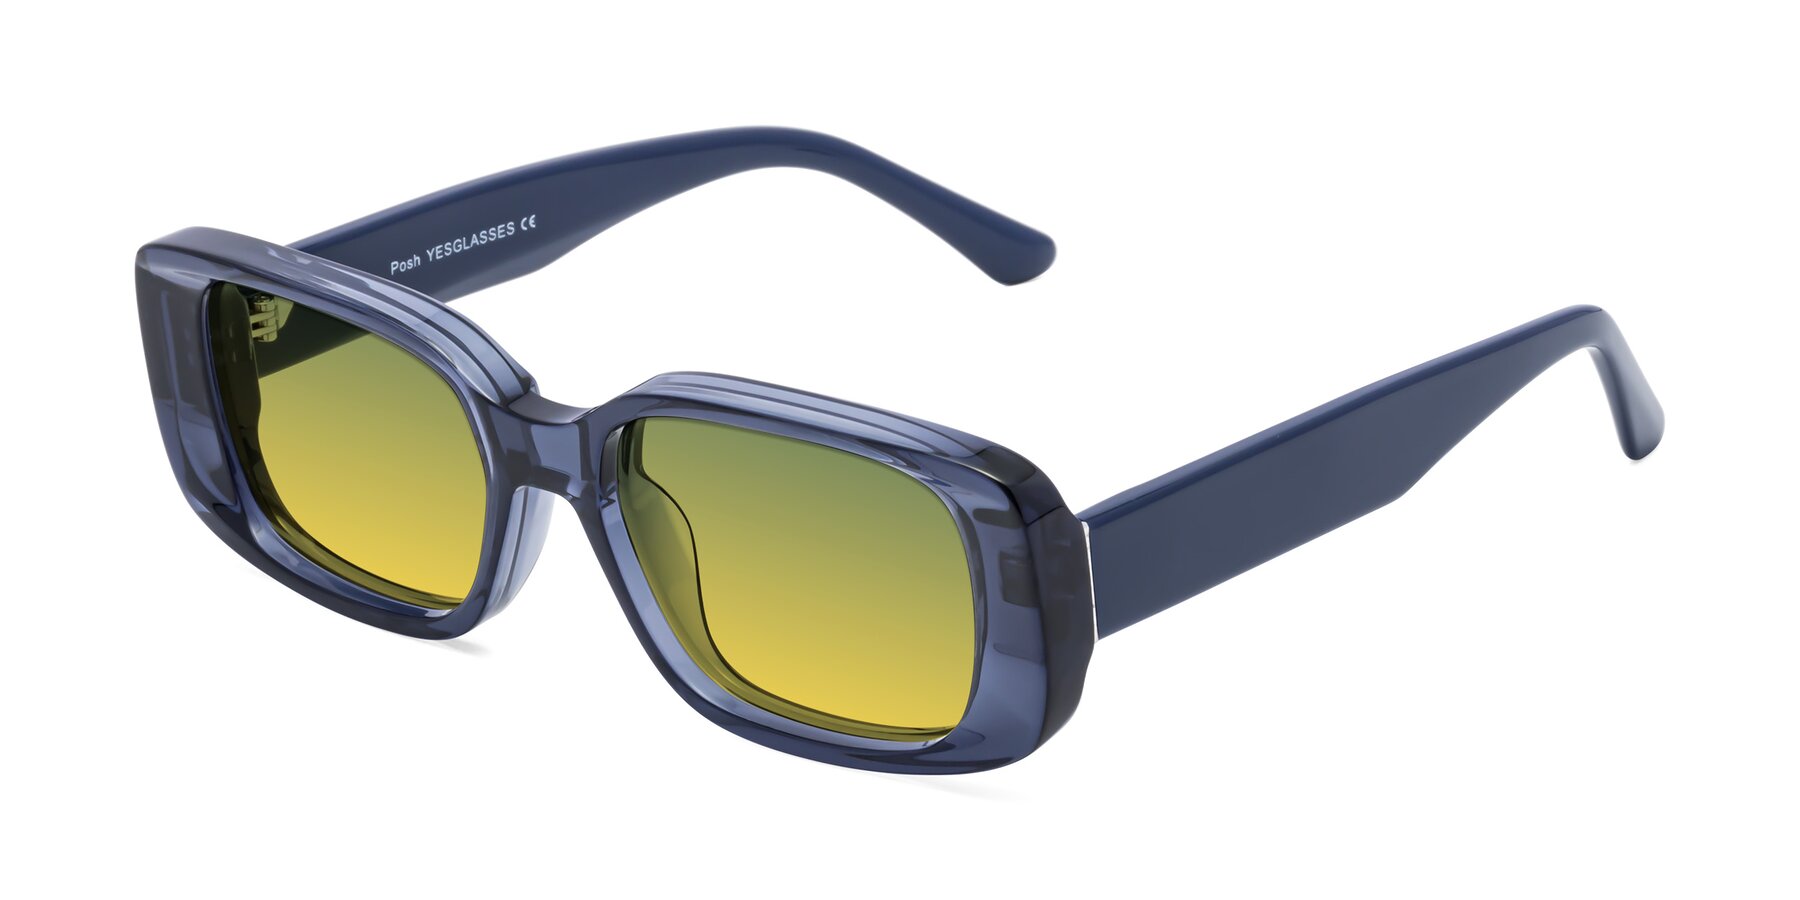 Angle of Posh in Translucent Blue with Green / Yellow Gradient Lenses